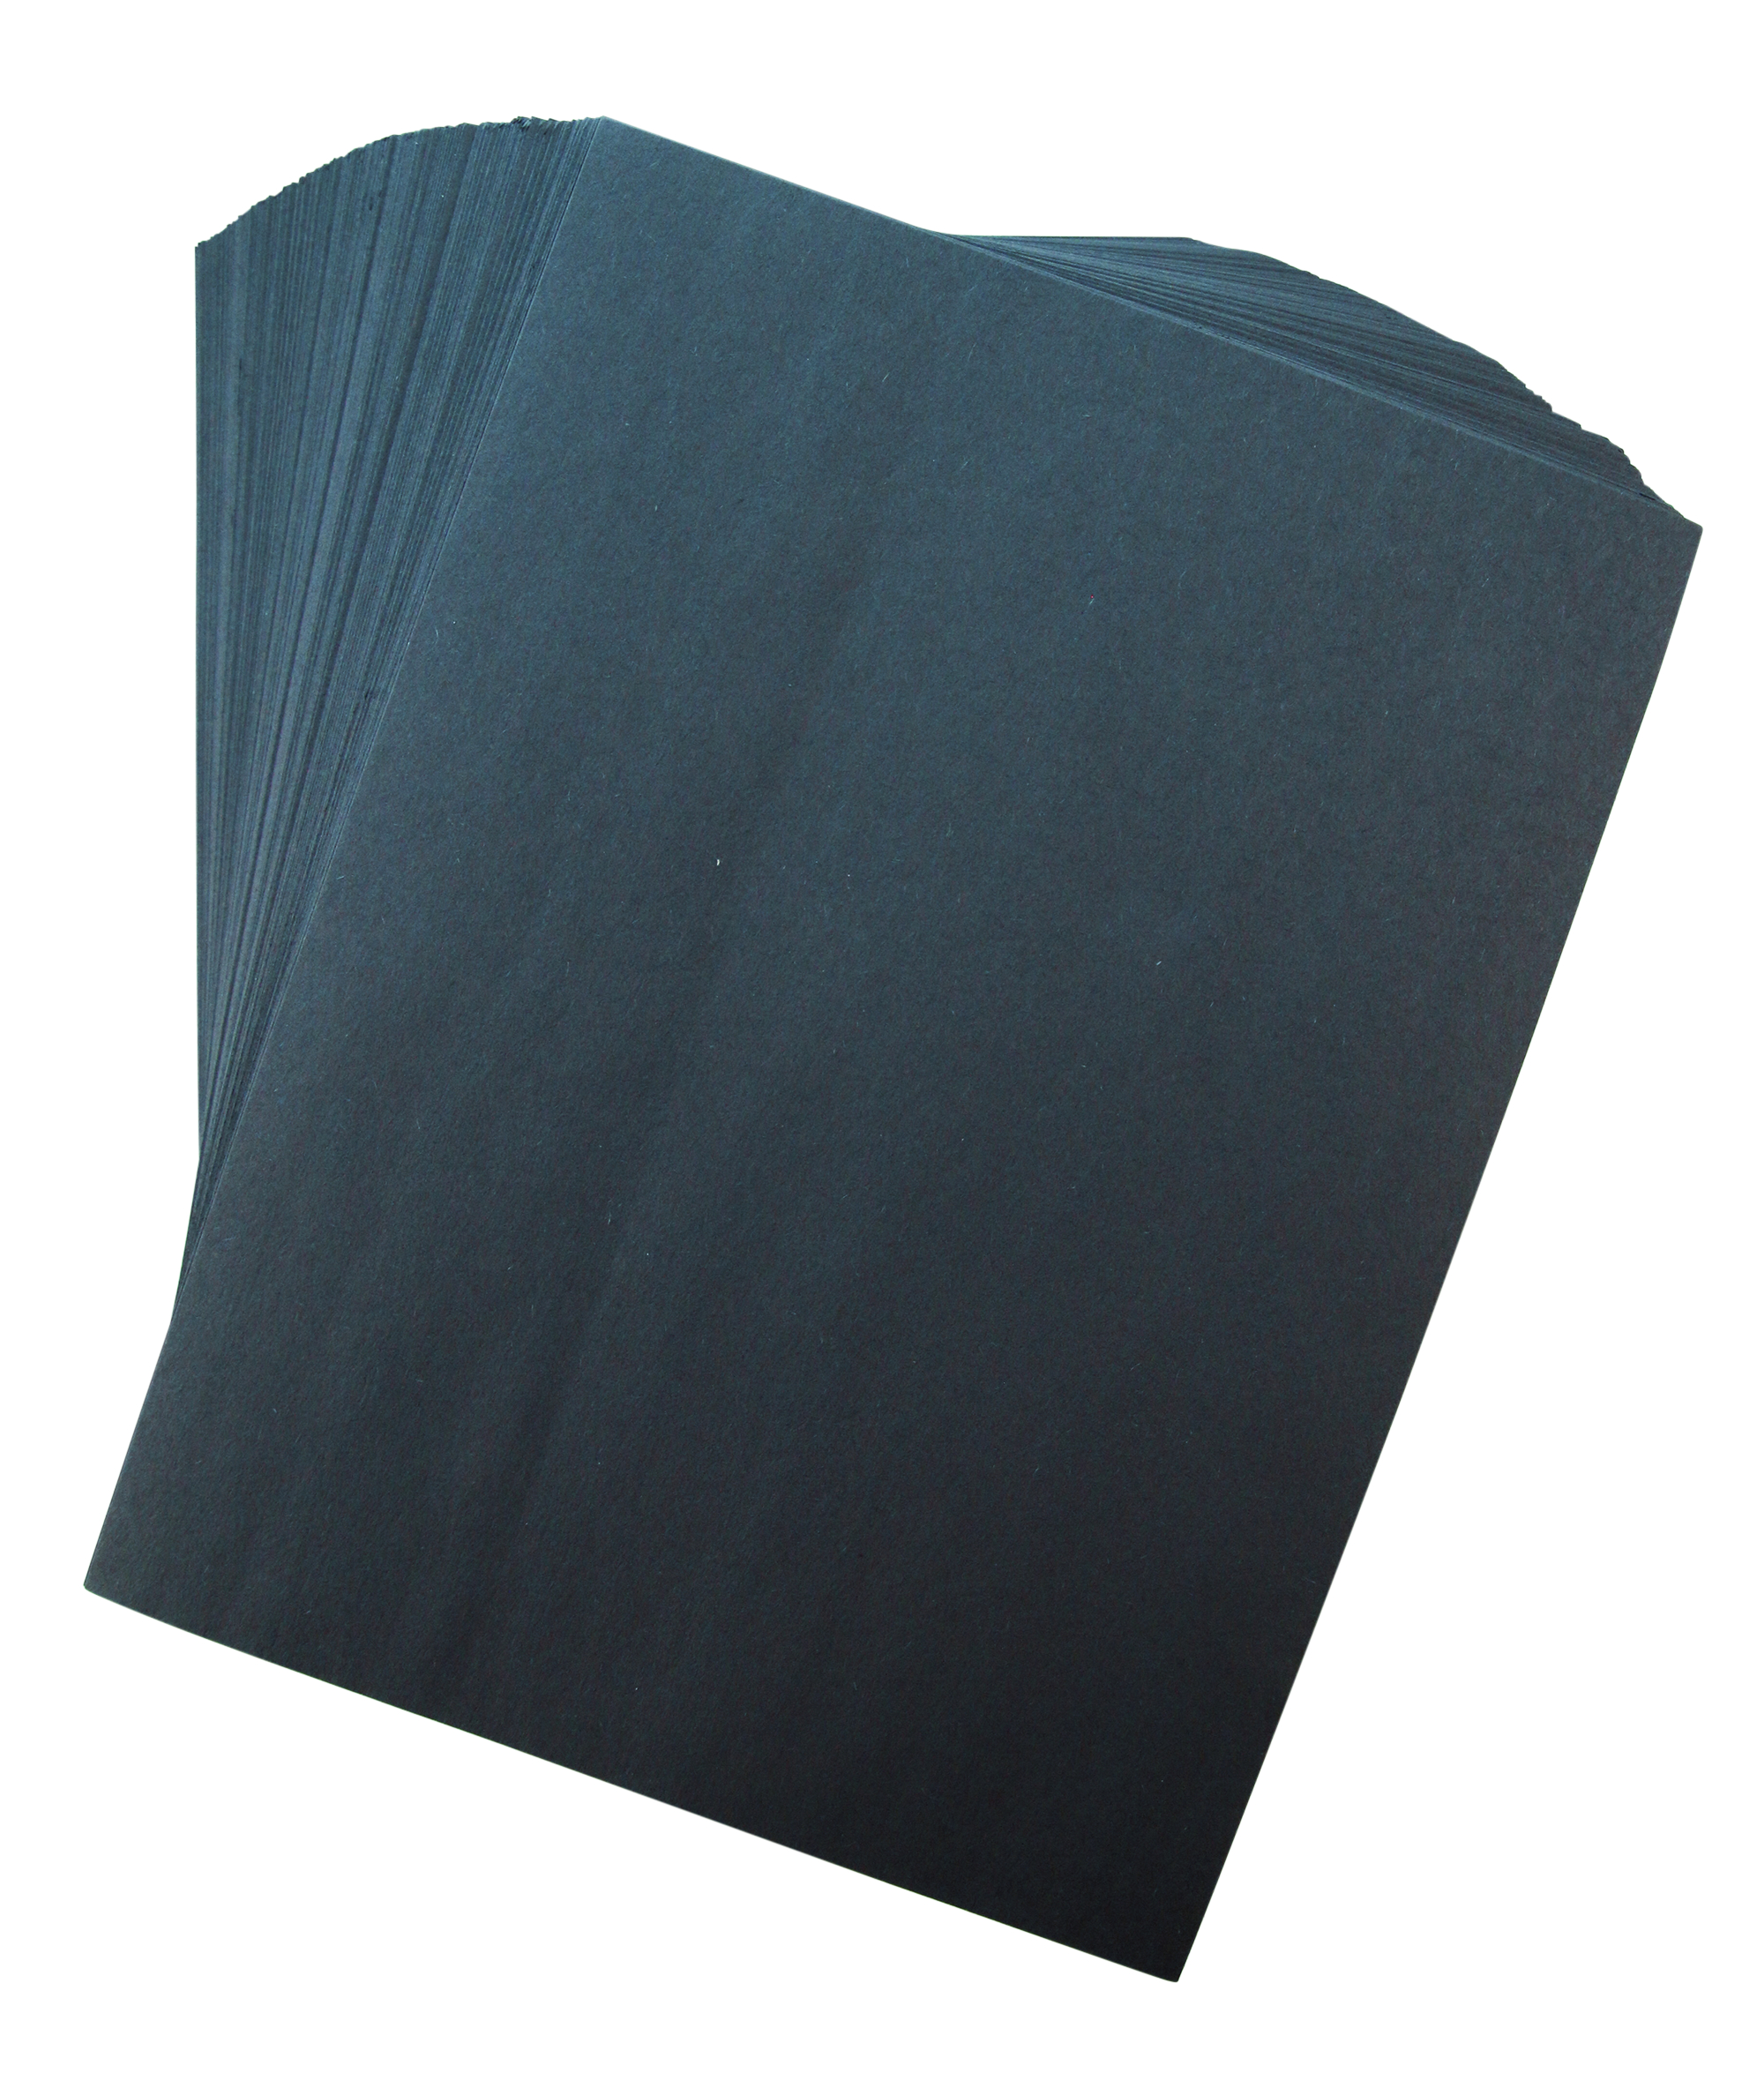 Childcraft Construction Paper, 9 x 12 Inches, Black, 500 Sheets 